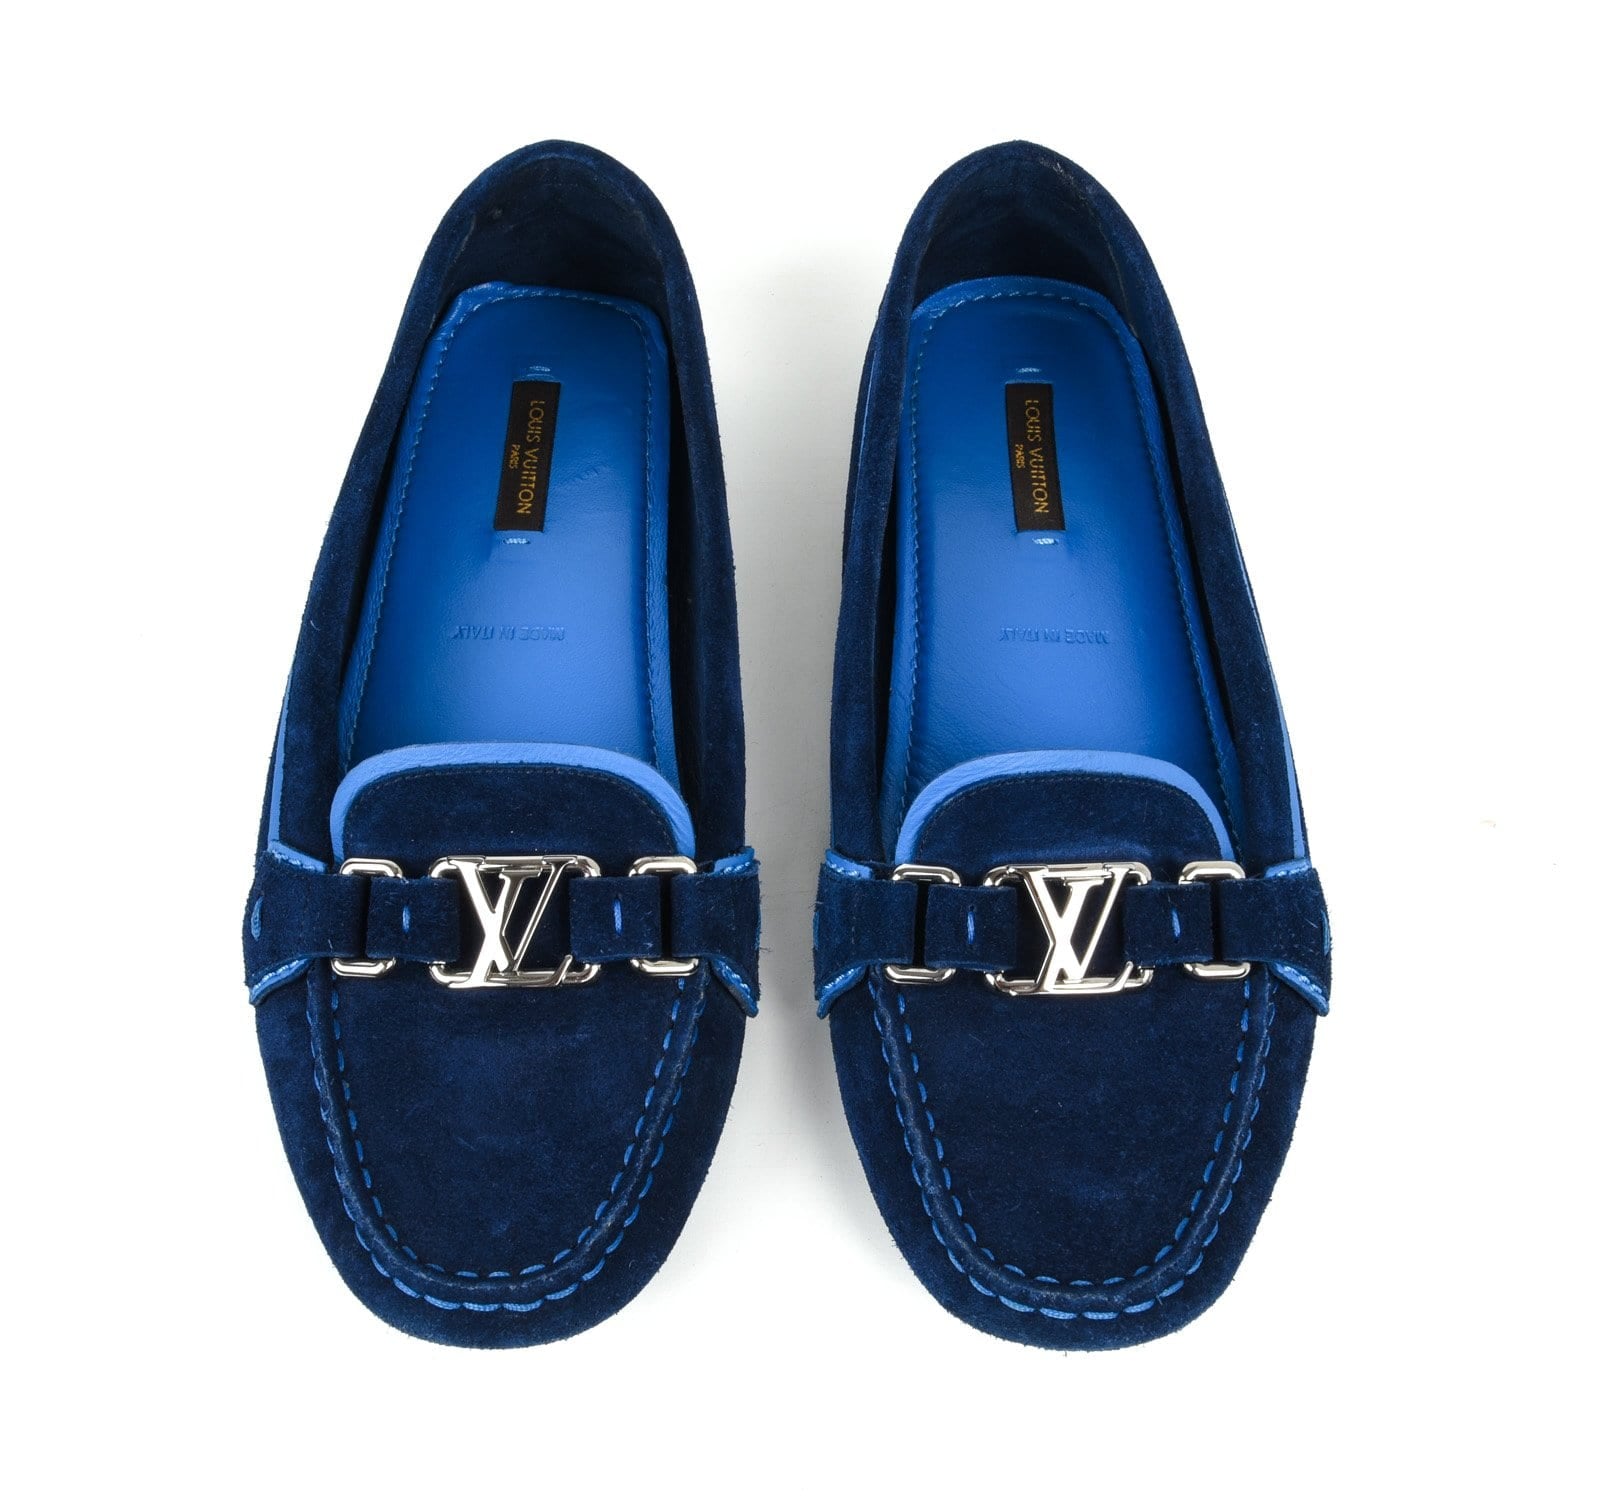 Louis Vuitton Shoe Navy Suede Loafer / Driving Shoe 38.5 / 8.5 – Mightychic